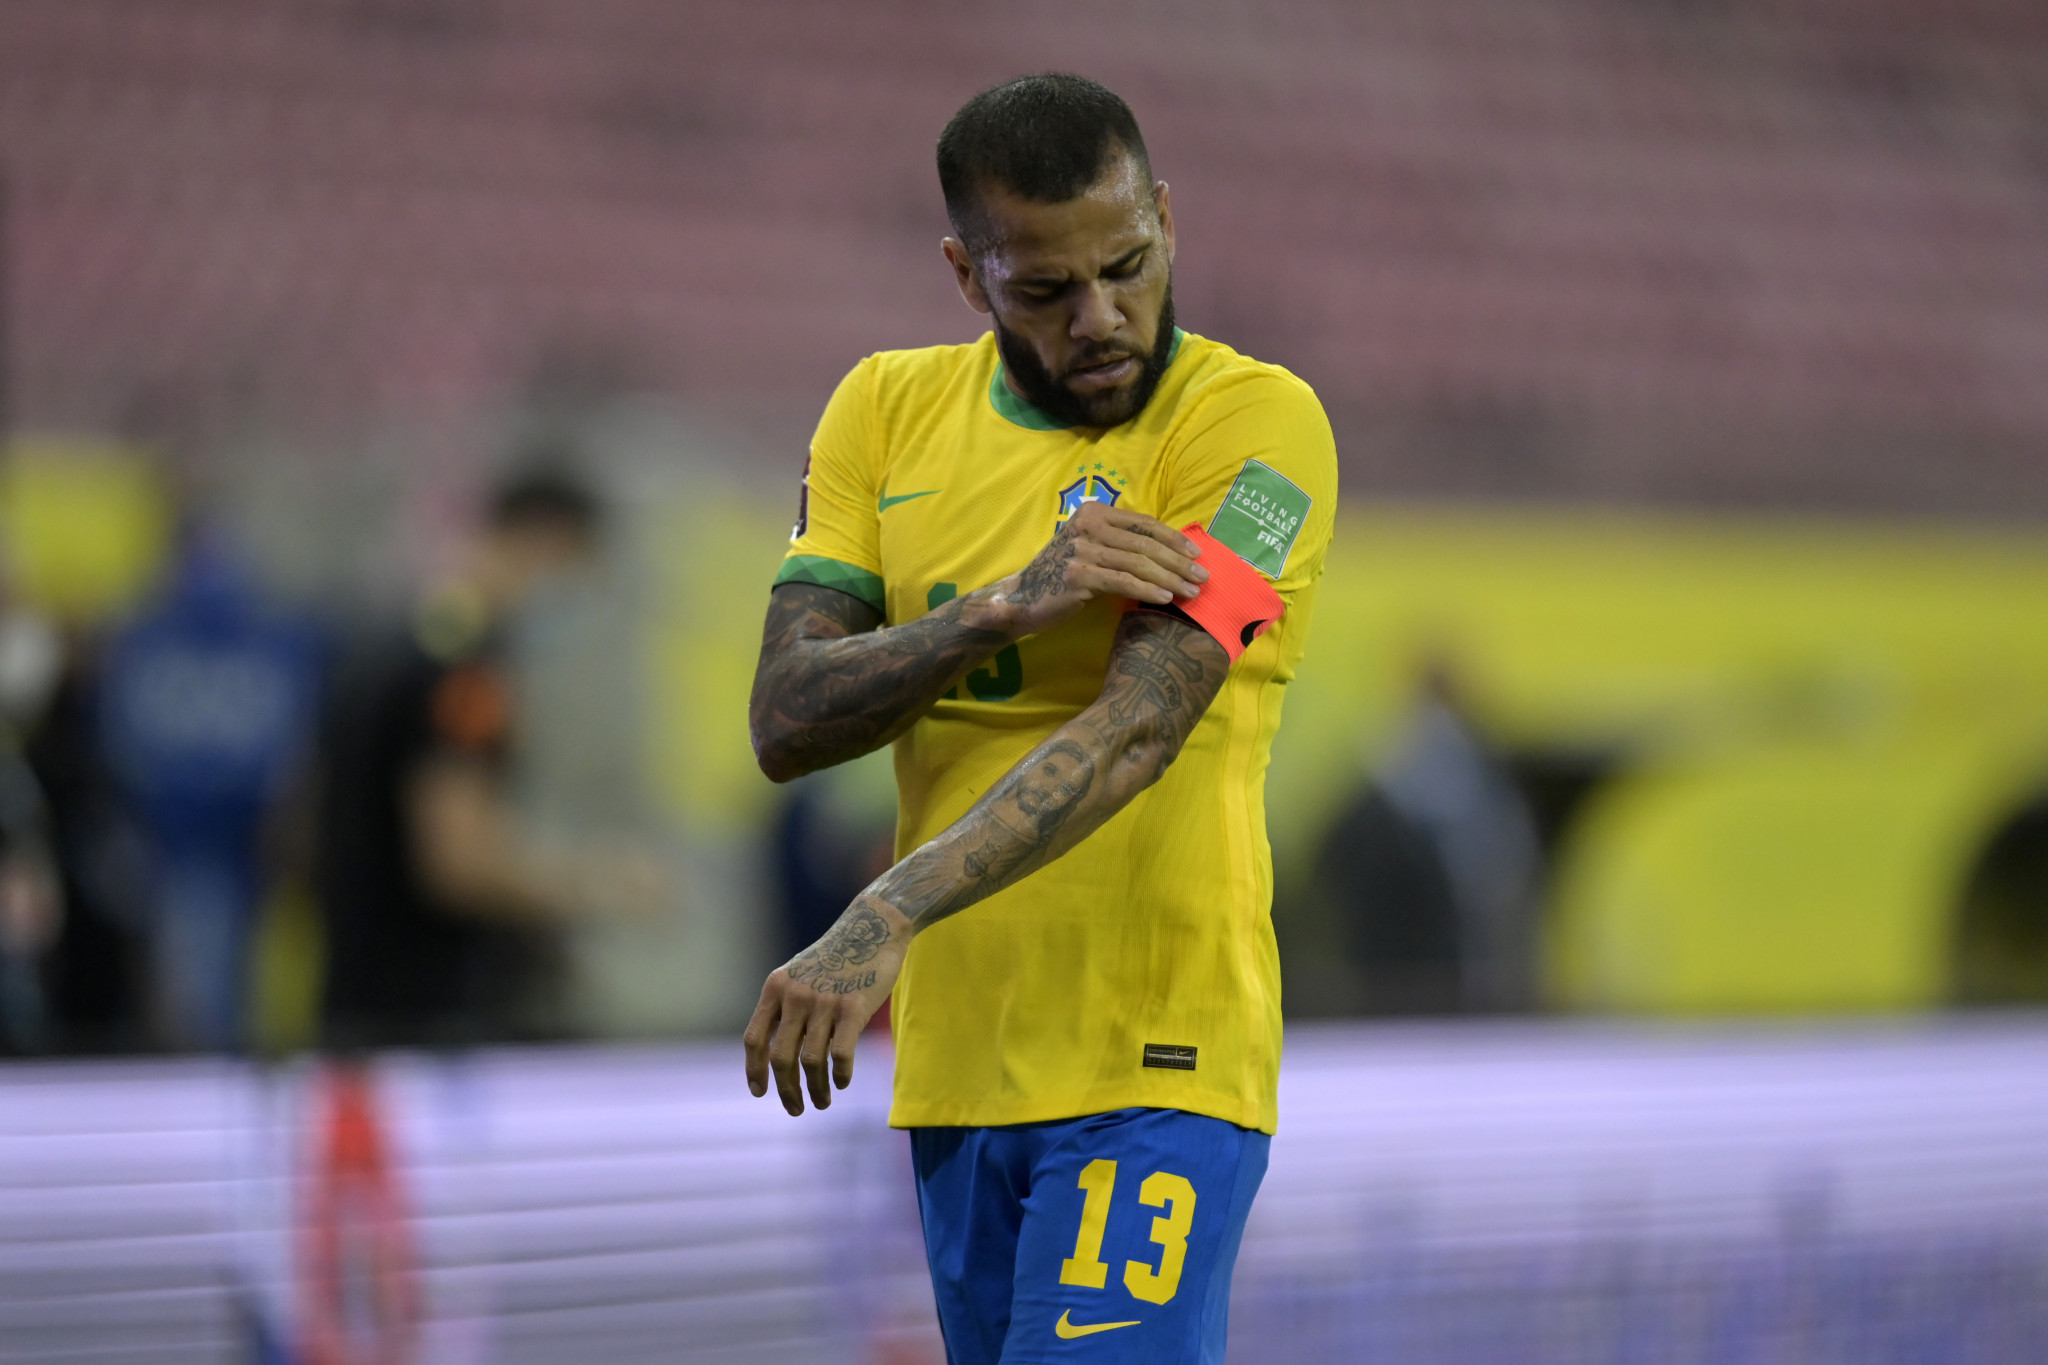 Brazilian football great Alves investigated for alleged sexual assault in nightclub